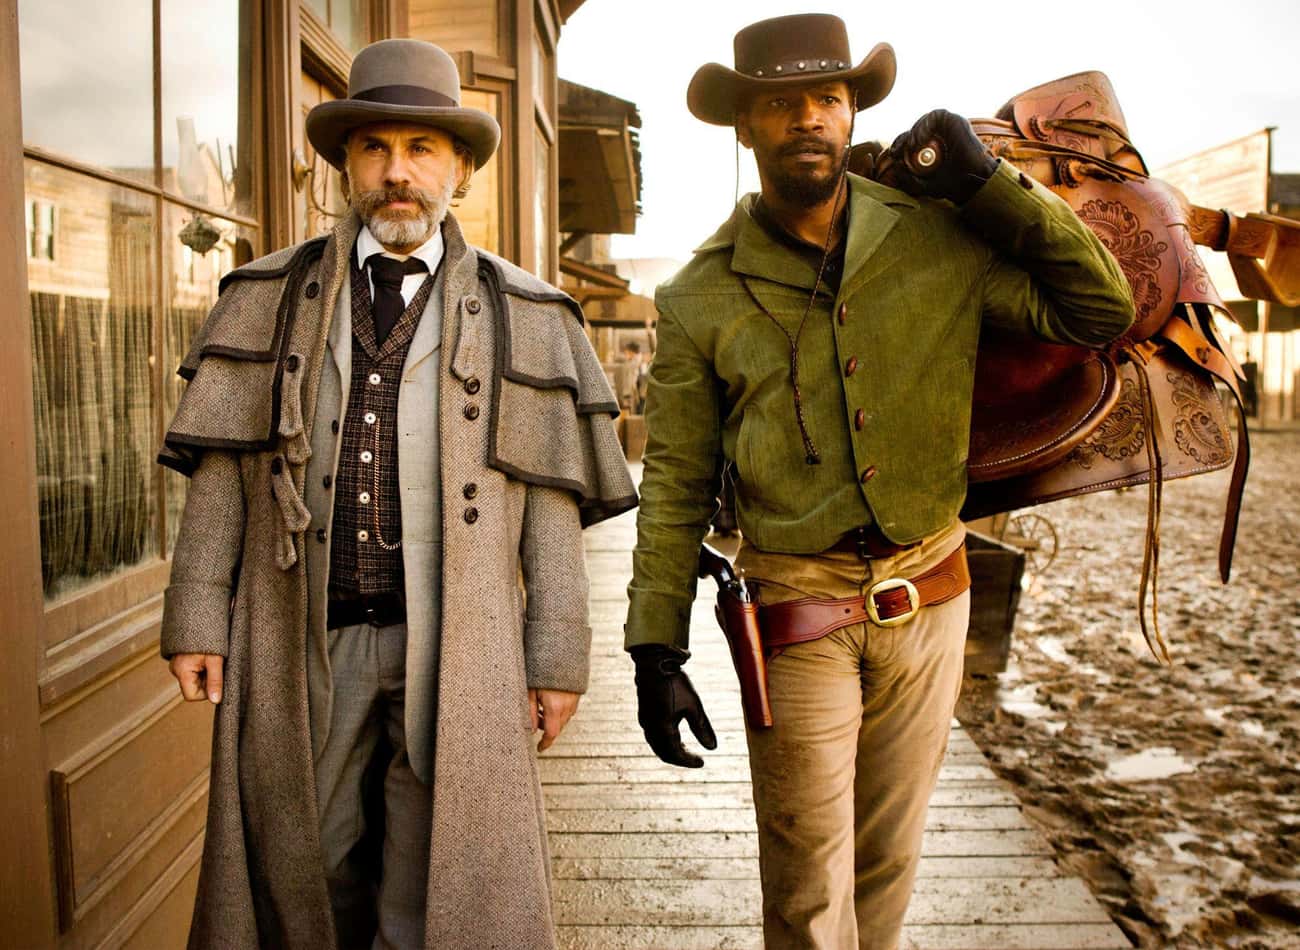 Dr. King Schultz Being A Dentist Has A Deeper Meaning In 'Django Unchained'